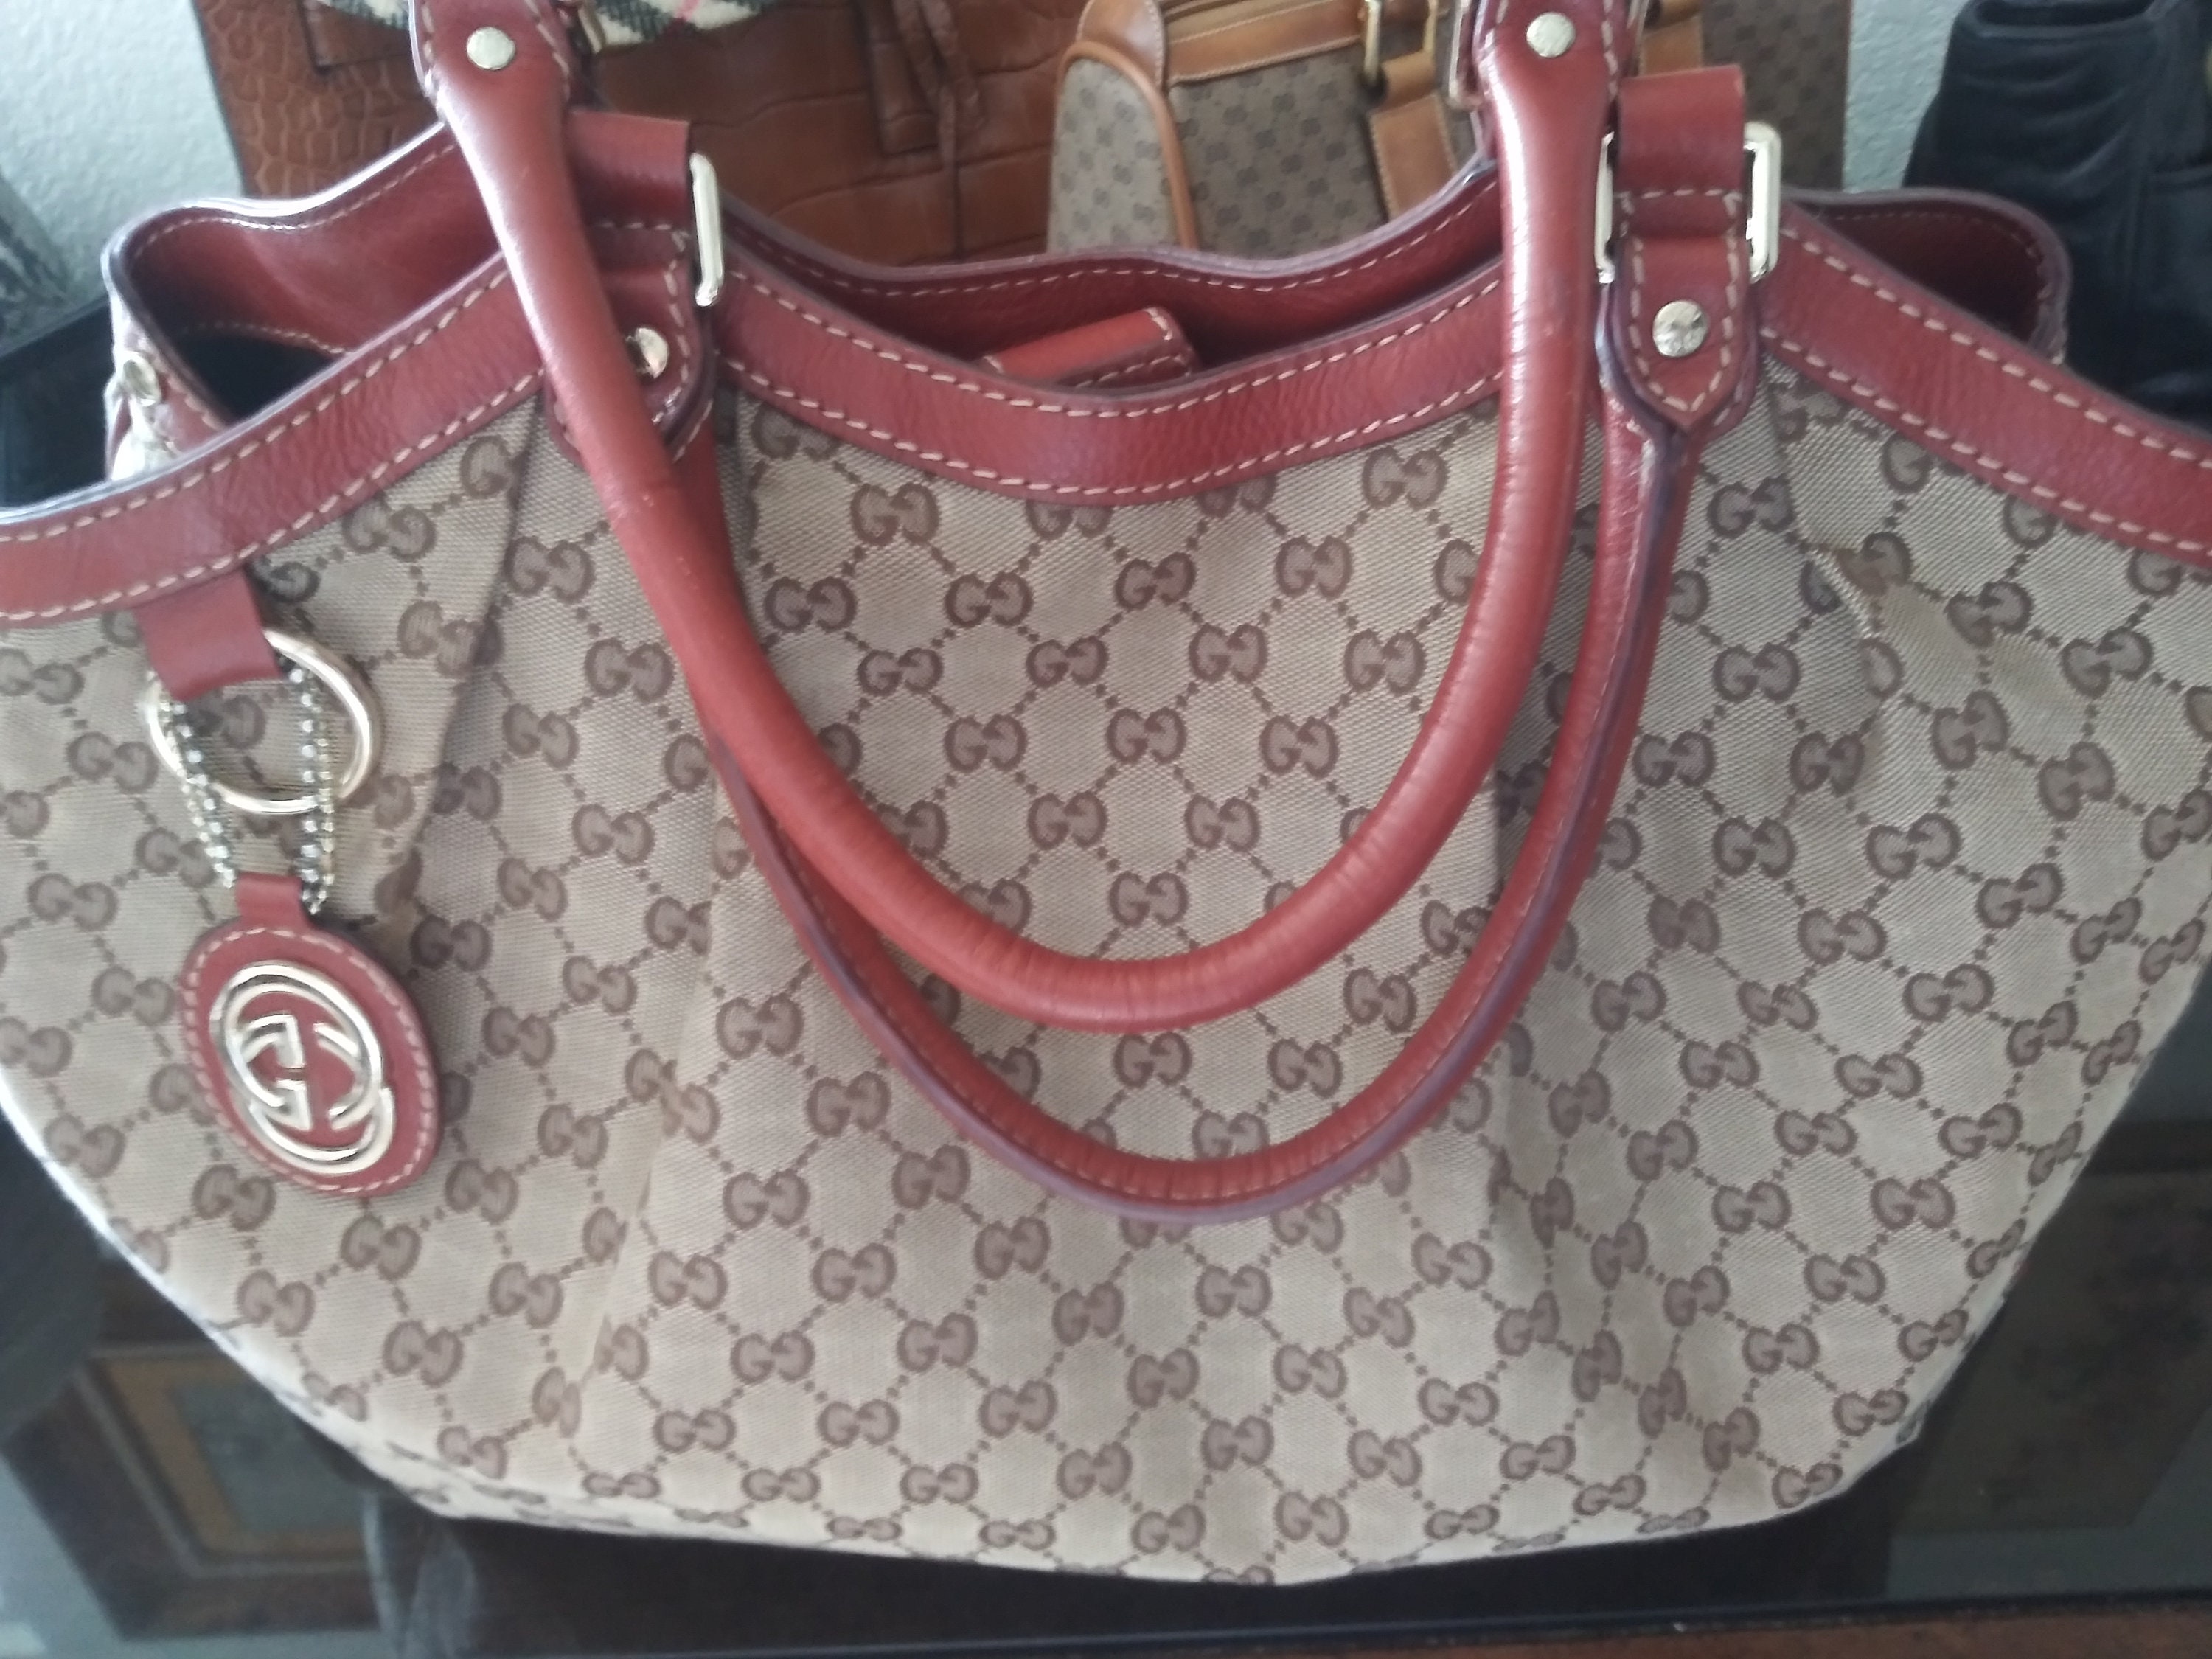 Gucci Gucci Sukey Large Bags & Handbags for Women